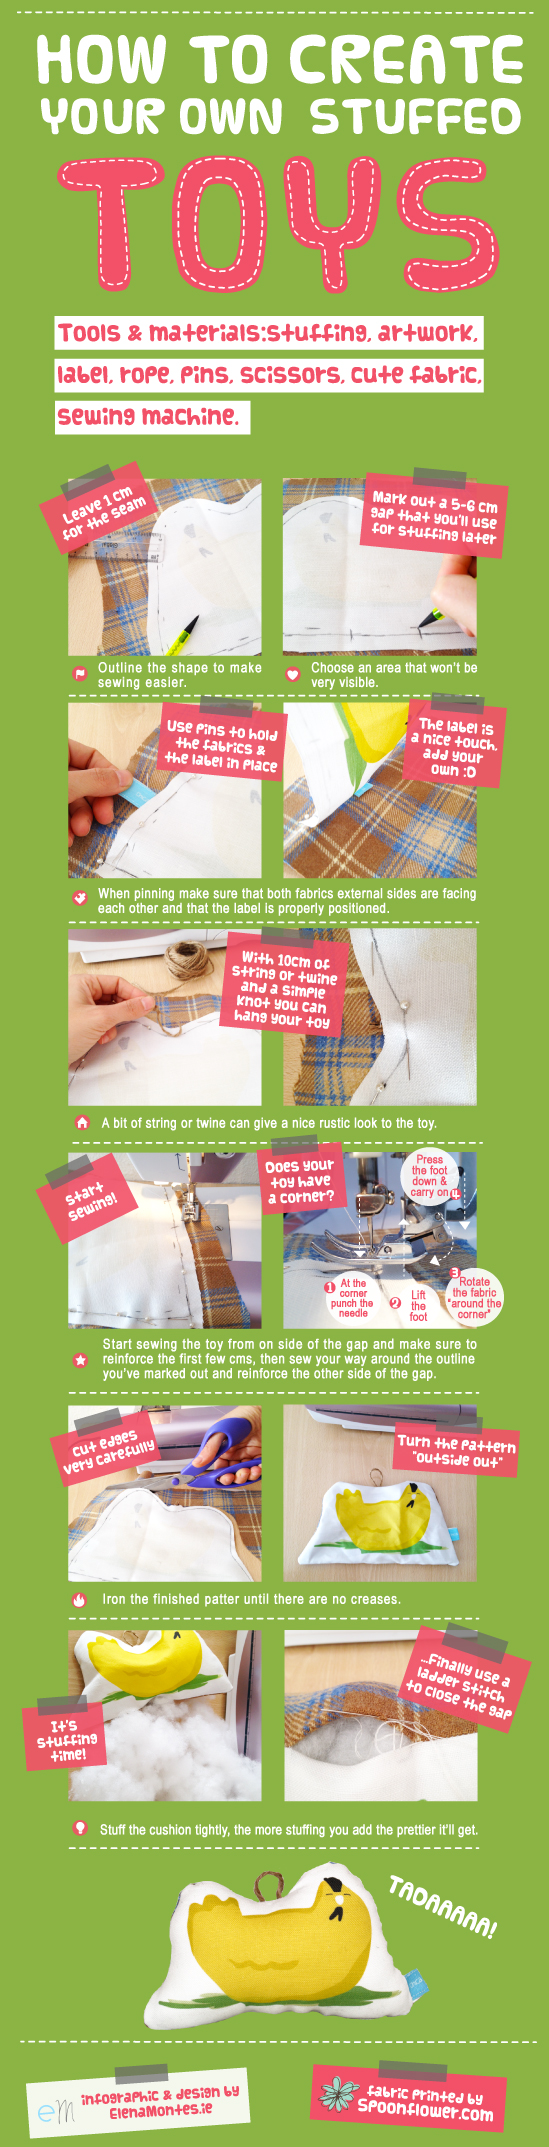 Infographic - How to Create Stuffed Toys